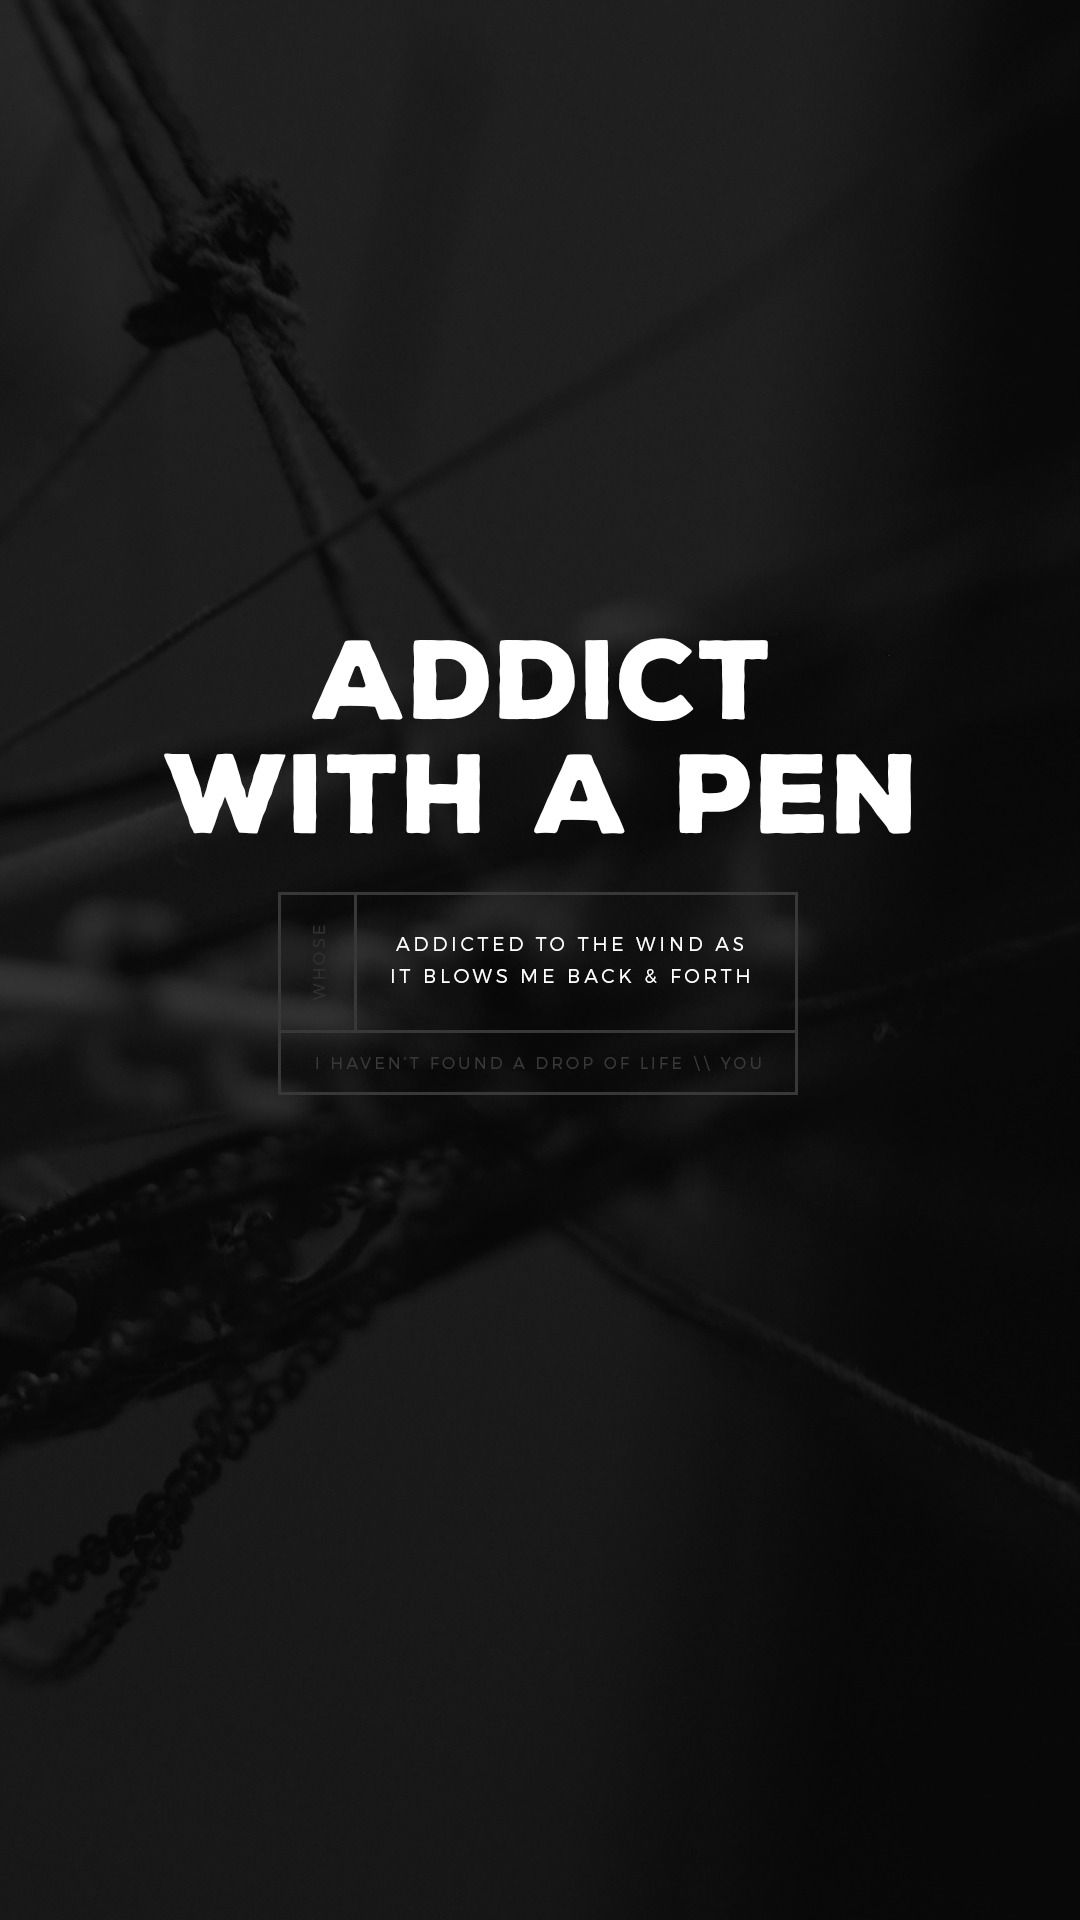 lockscreens no. 121 with a pen lyrics by. Best quotes wallpaper, Badass quotes, Life quotes